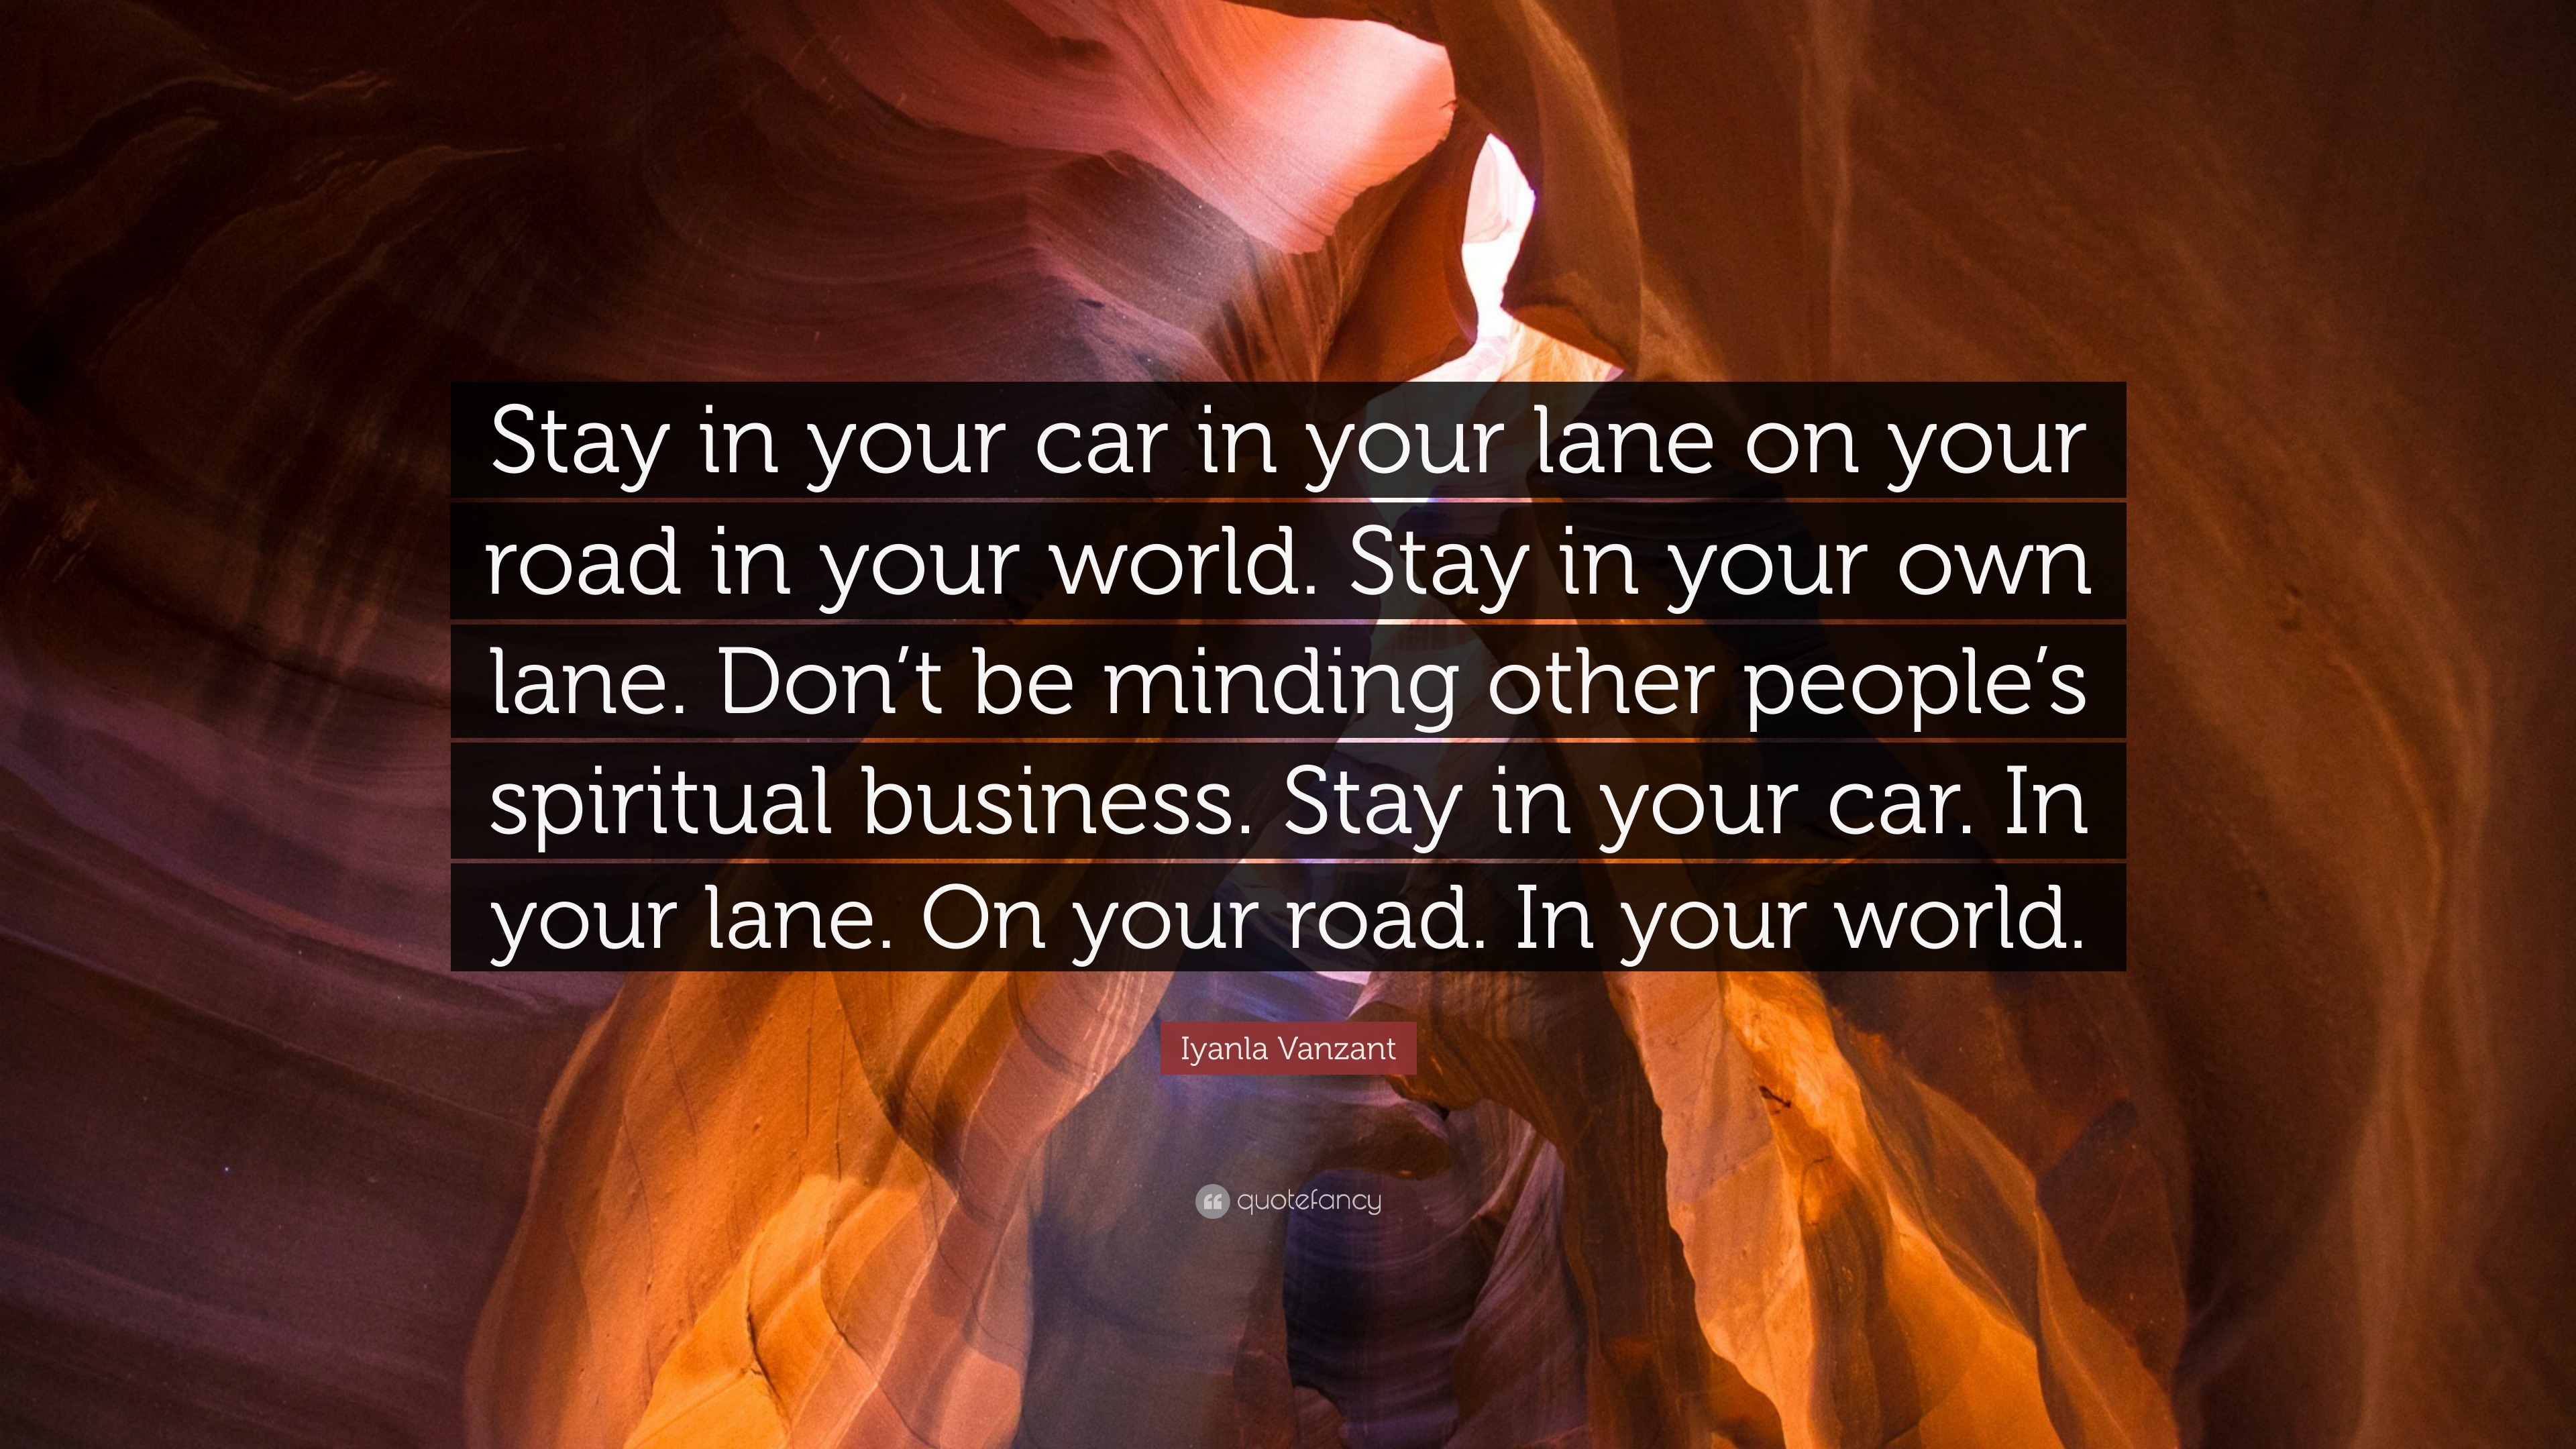 Iyanla Vanzant Quote: “Stay In Your Car In Your Lane On Your Road In Your World. Stay In Your Own Lane. Don't Be Minding Other People's Spiritu...”